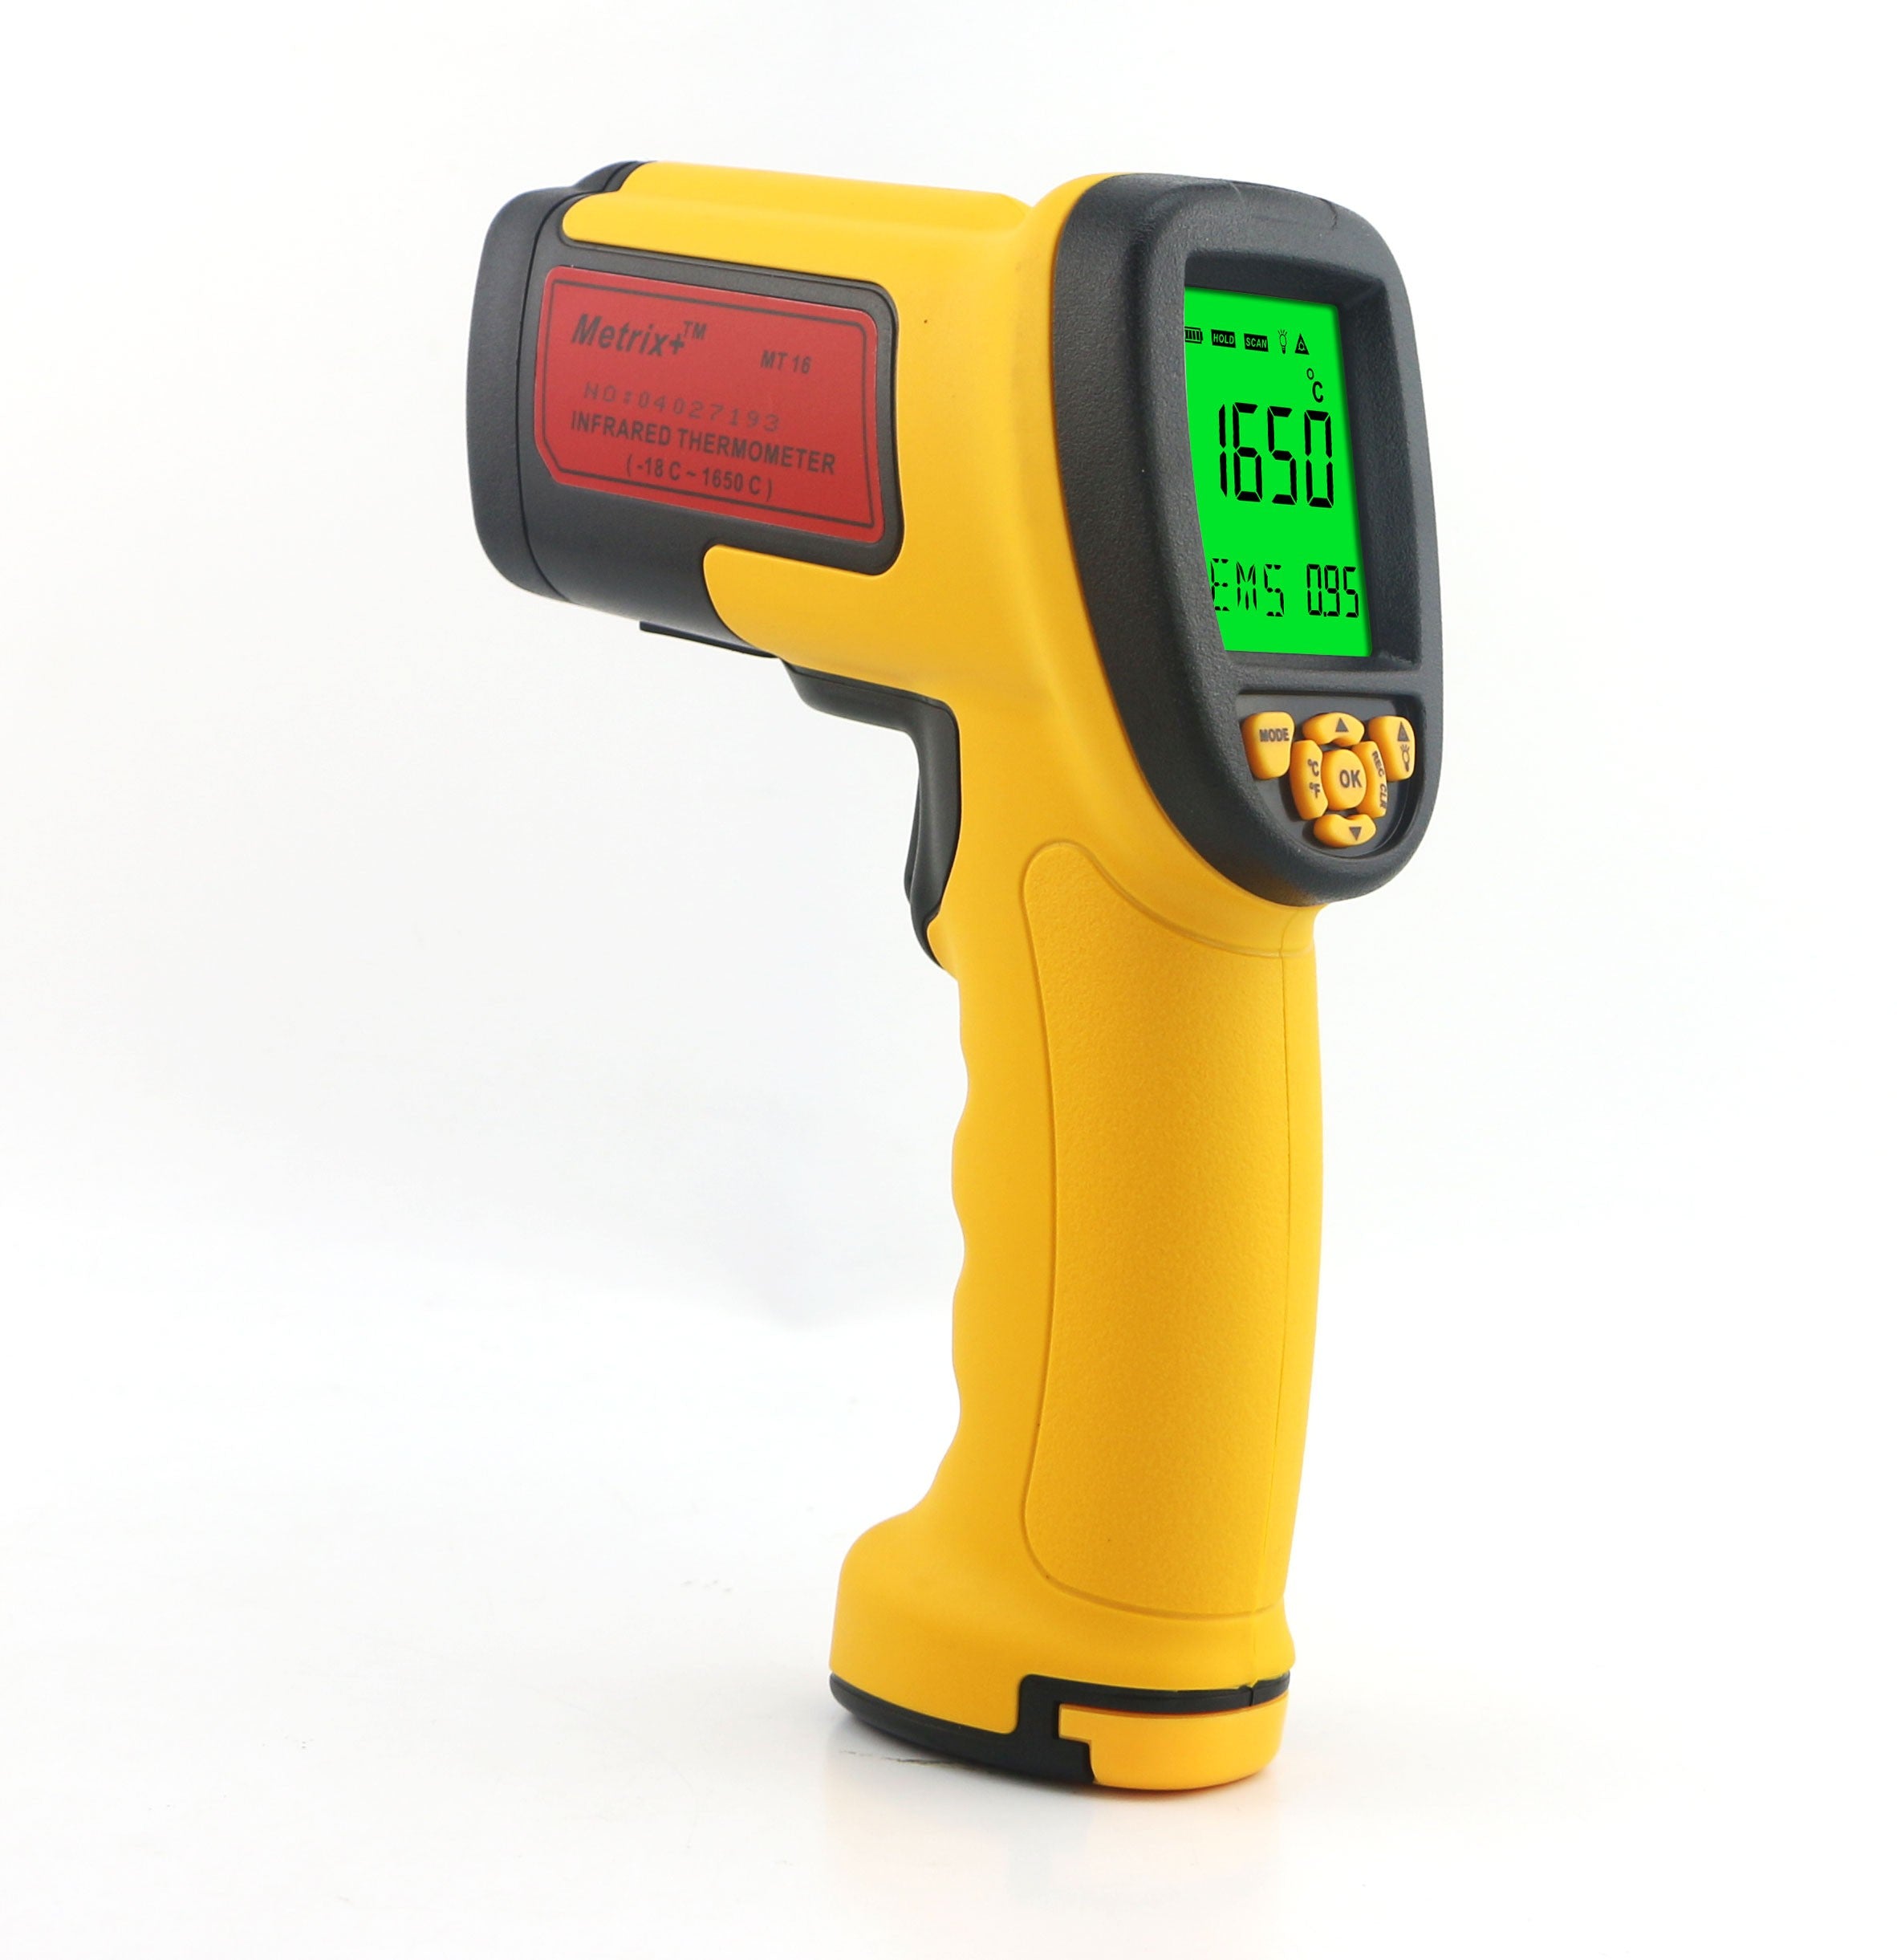 Metrix+ Rugged Infrared Thermometer MT 16